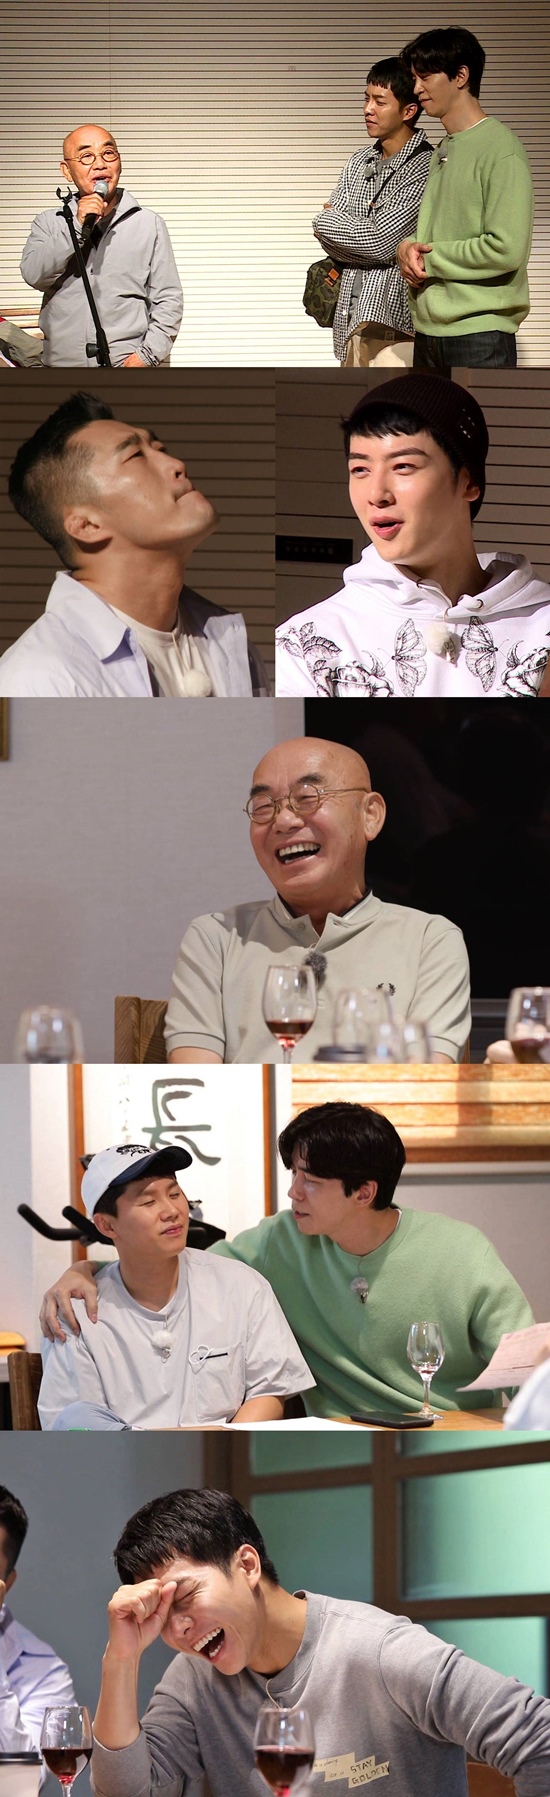 All The Butlers and romantic master Yi Jang-hui met.On SBS All The Butlers, which is broadcasted on the 13th, a day with romantic master Yi Jang-hui, who keeps dreams and romance about Heaven, will be held.On this day, Yi Jang-hui, who caught up with the Korean music industry in the 70s and 80s, will be the master.Yi Jang-hui invited the members directly to his home in Ulleungdo; the members were appalled by the sight of the sight as soon as they entered the garden.The largest garden and pond in the world even had an egrets.In particular, Lee Seung-gi expressed his awe of Master, saying, I heard that the scale is different, but it is this much.Master Yi Jang-hui also surprised all members by revealing that he had been Large with the US president in the past.He is the back door of an incredible spectacular life Kahaani, which made the scene buzz by telling him casually.On the other hand, Yi Jang-hui had time to talk with the members about three conditions that make my life Heaven.One of the members said that he needed superpower for Heaven, and made the scene into a laughing sea.Master then sang the hit song When My Age is Sixty and One and thought about the meaning of life with the members.Through a genuine conversation with Master, the members wonder what they would have thought.The story of romantic master Yi Jang-hui, who realized the Heaven in Ulleungdo with a dream about Heaven, can be found on SBS All The Butlers broadcasted at 6:25 pm on the 13th.Photo: SBS